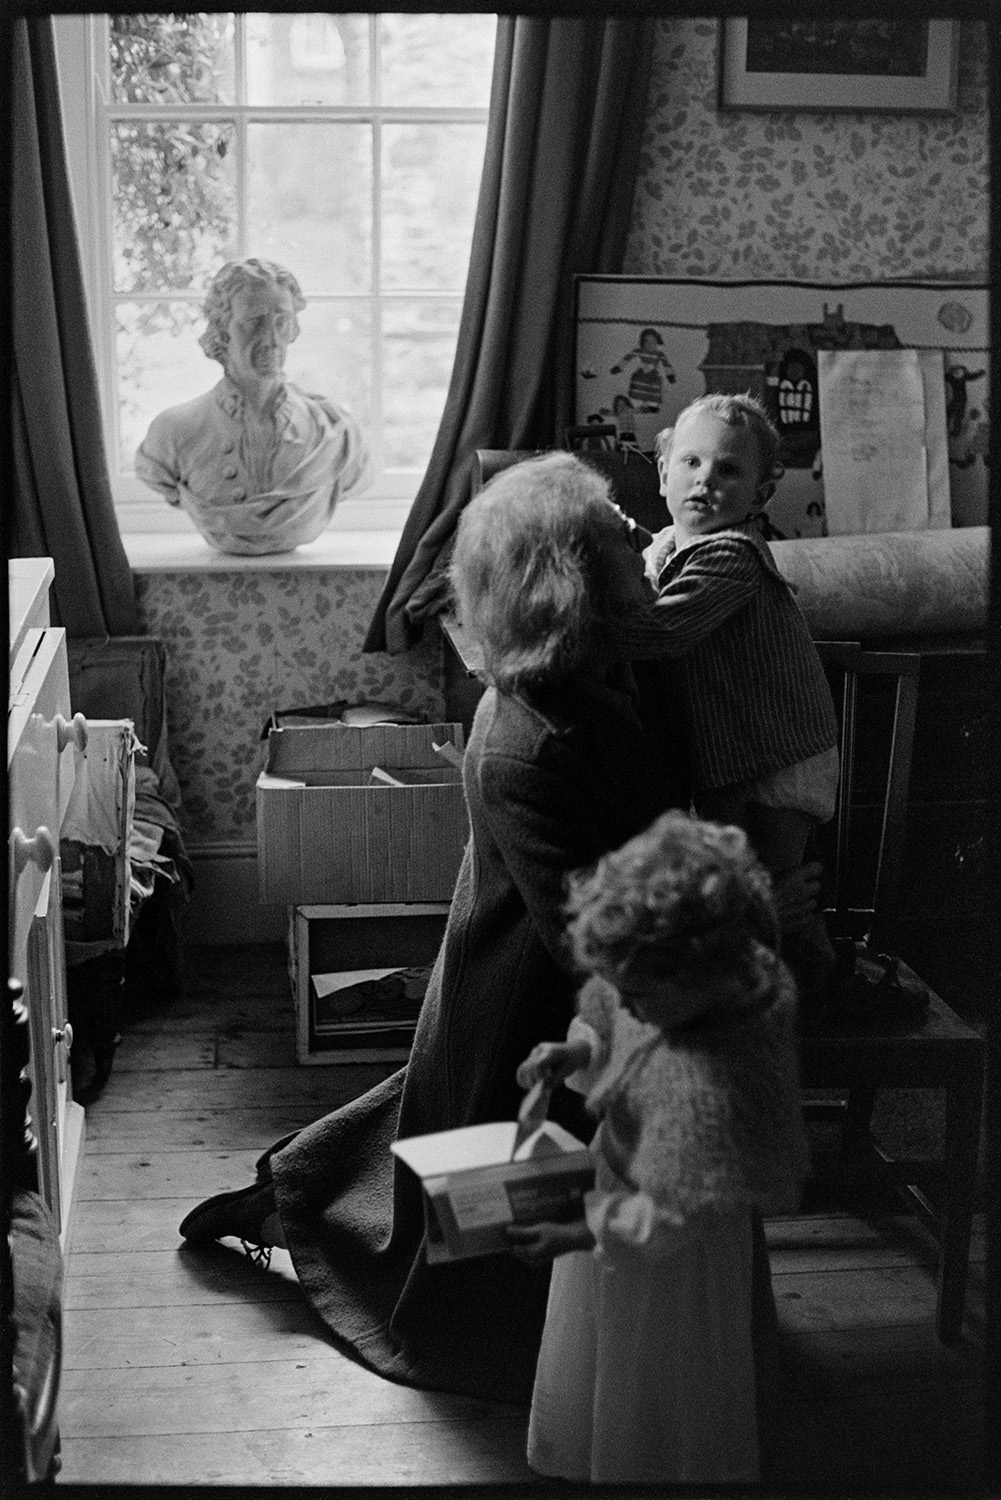 Christening. Family at home and outside Church with vicar.
[A woman with a baby and young child in a room at Clovelly after a christening in the Rous family. A bust of a man is displayed in the window.]